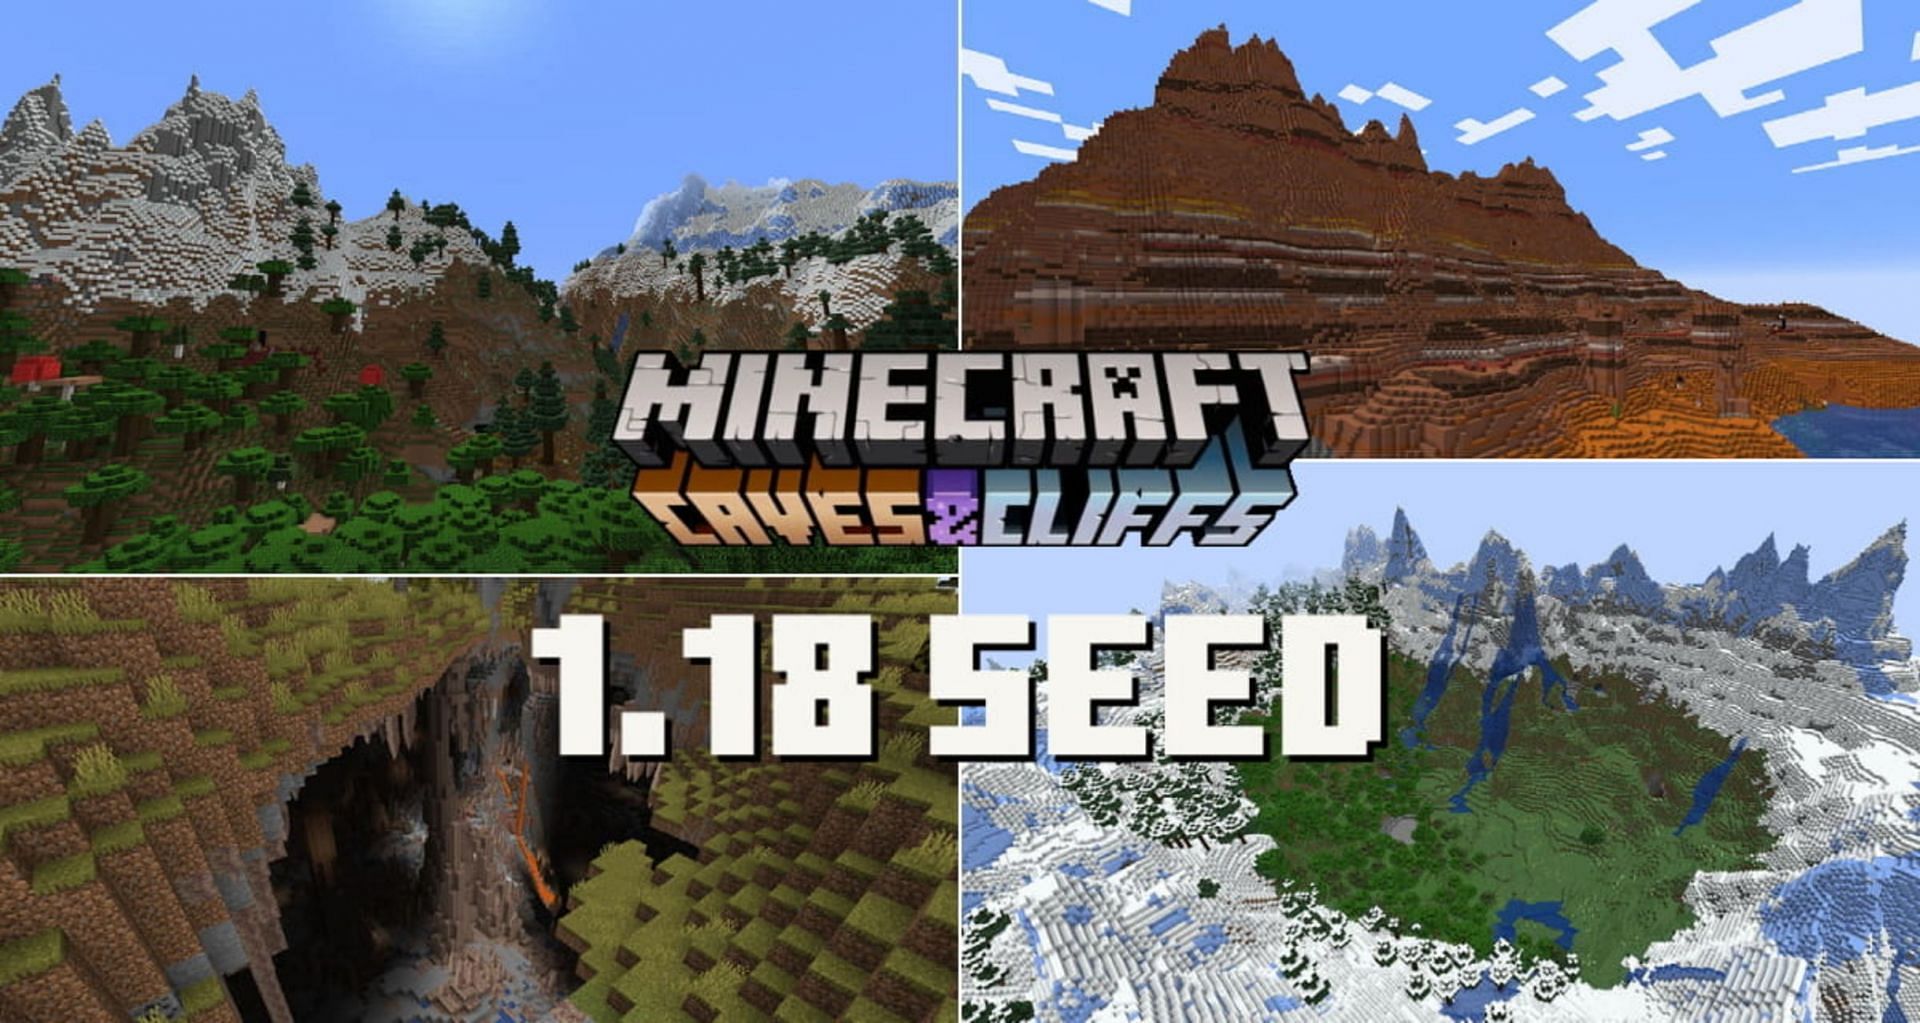 10 best Minecraft Bedrock seeds for 1.18 Windows 10, console, and mobile